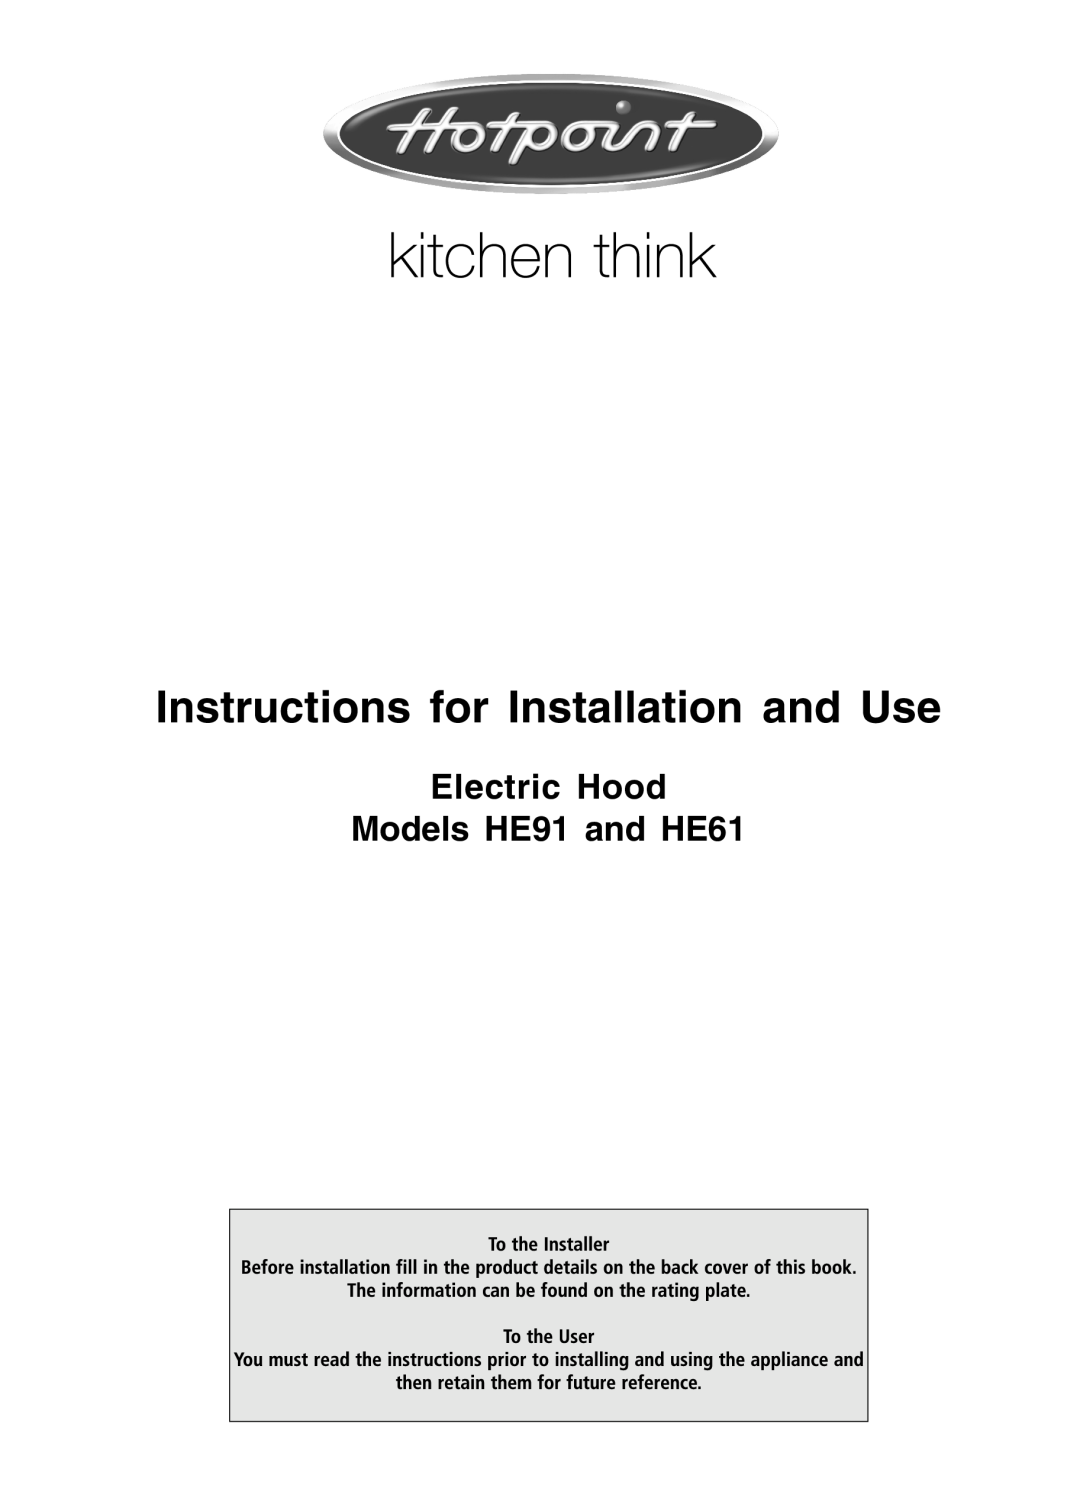 Hotpoint manual Electric Hood Models HE91 and HE61, Instructions for Installation and Use 